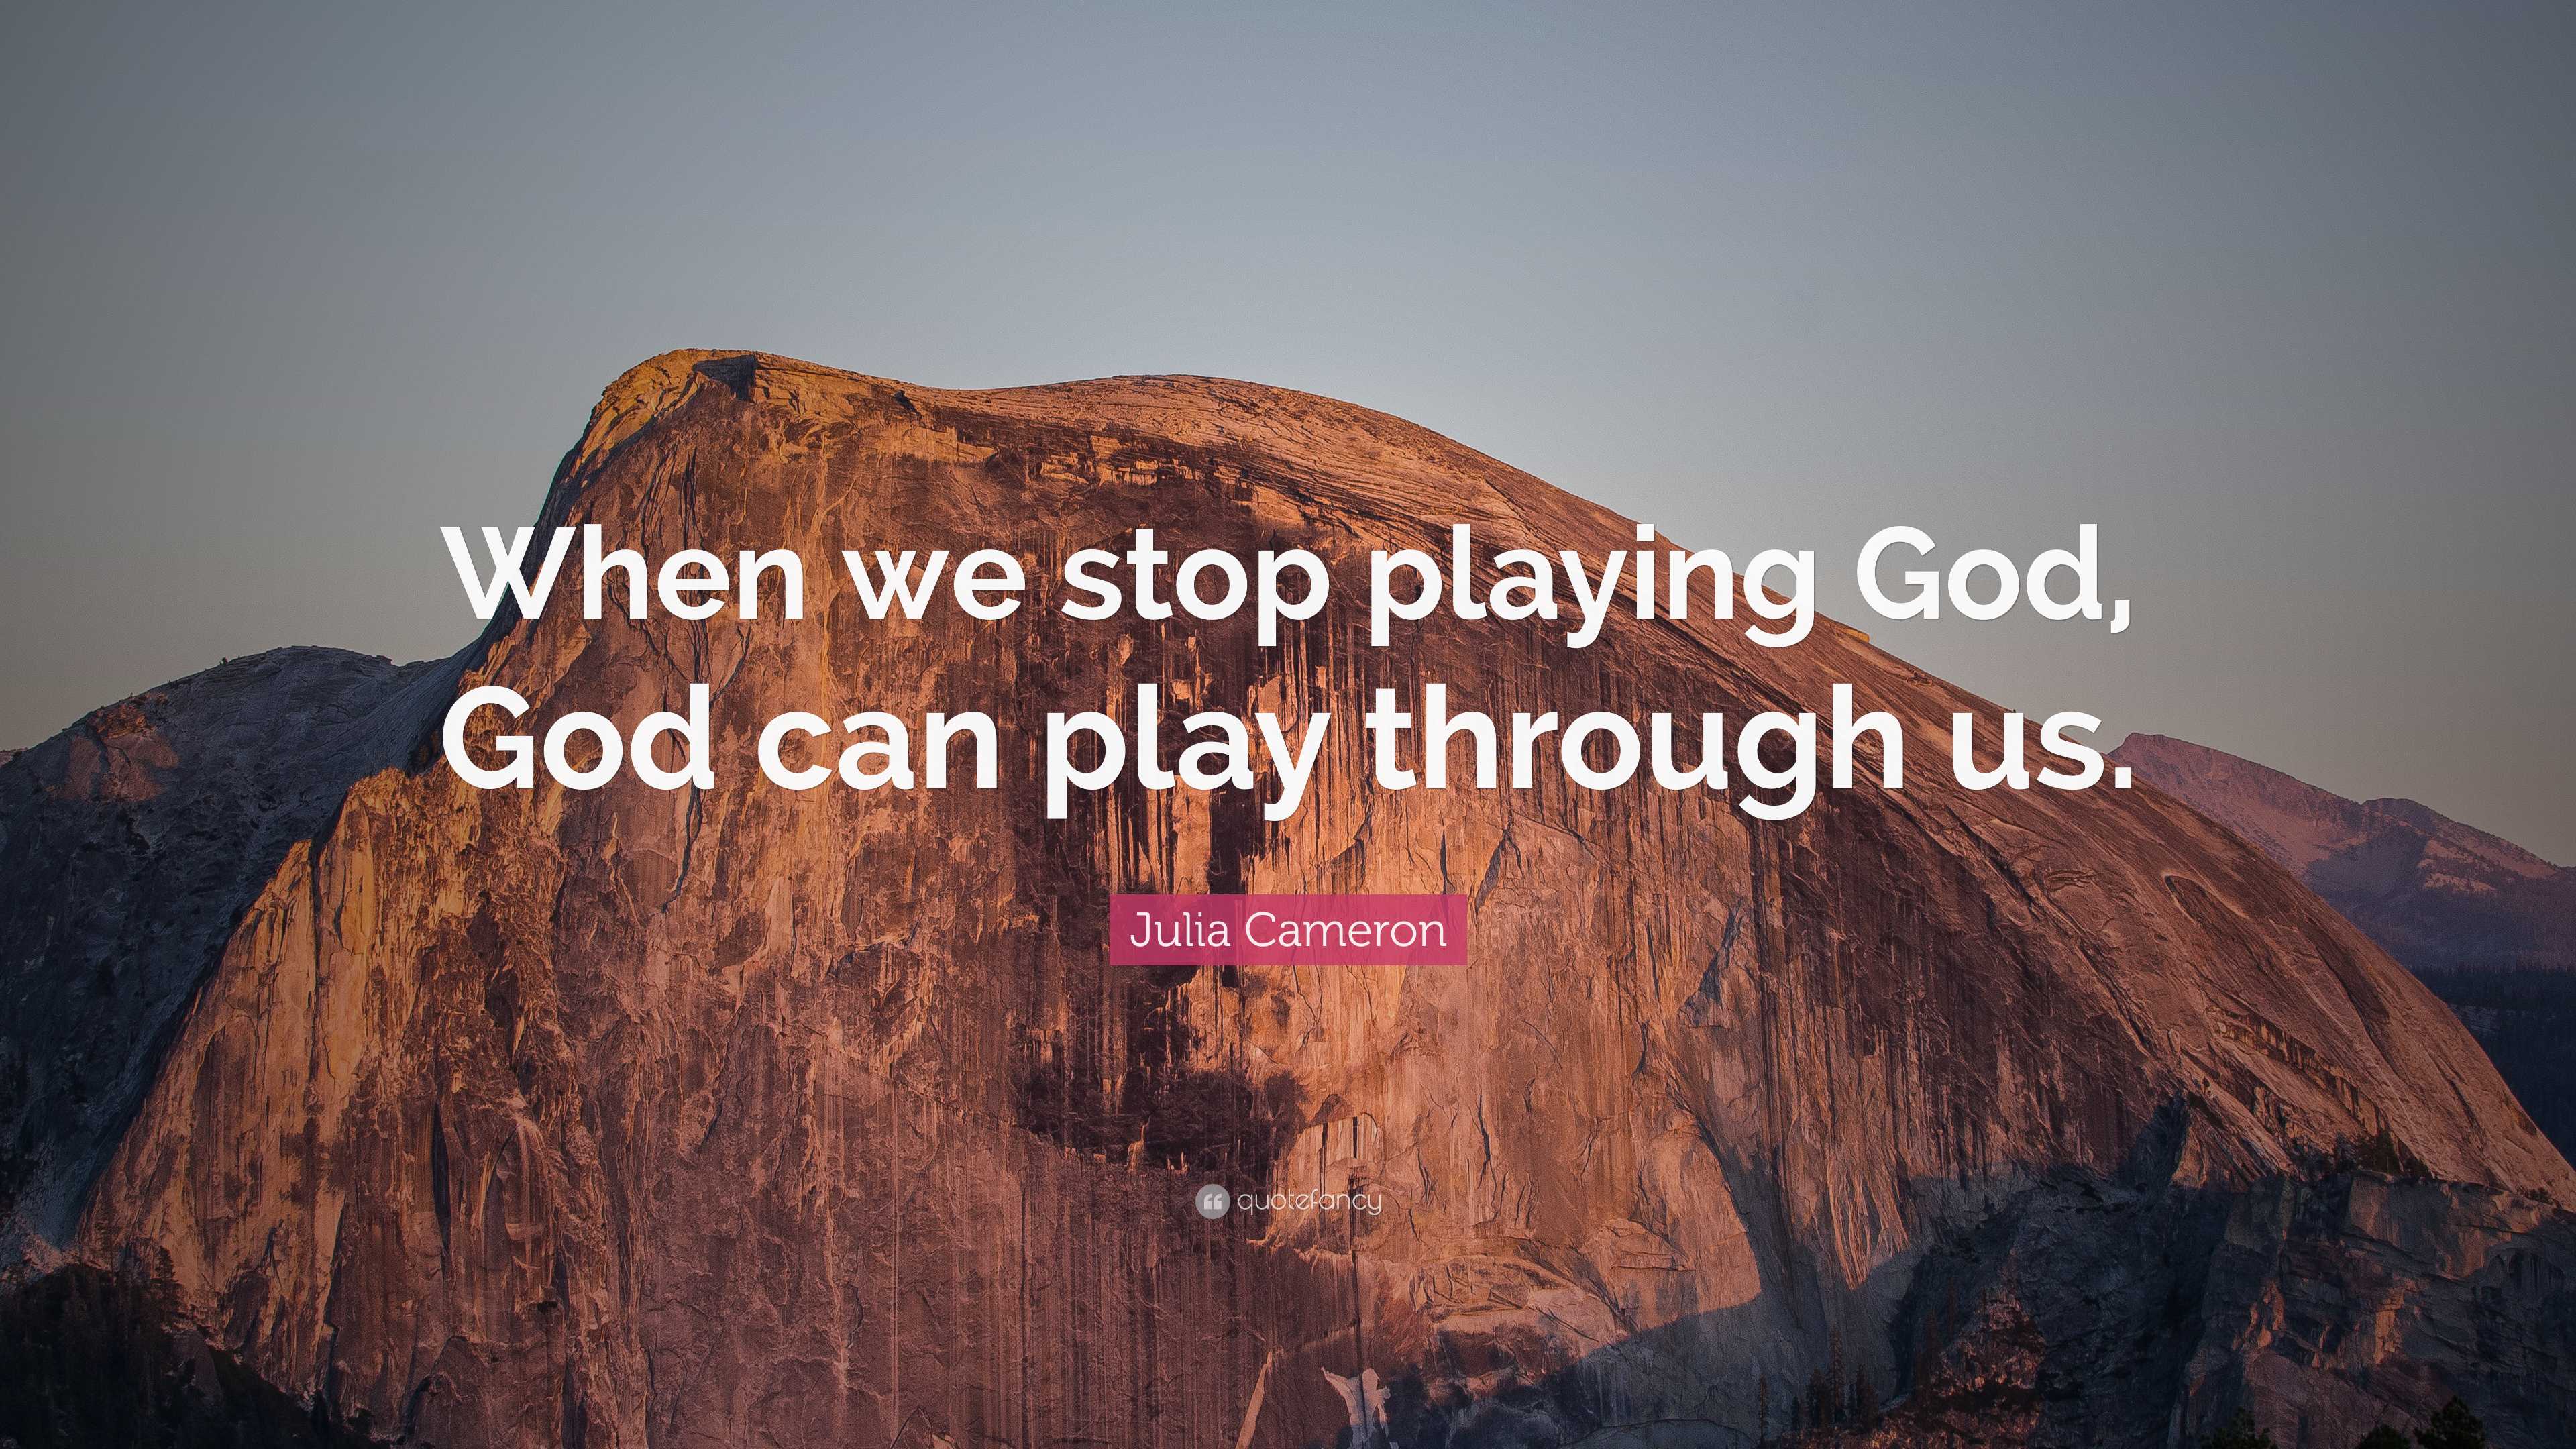 Julia Cameron Quote: “When we stop playing God, God can play through us.”